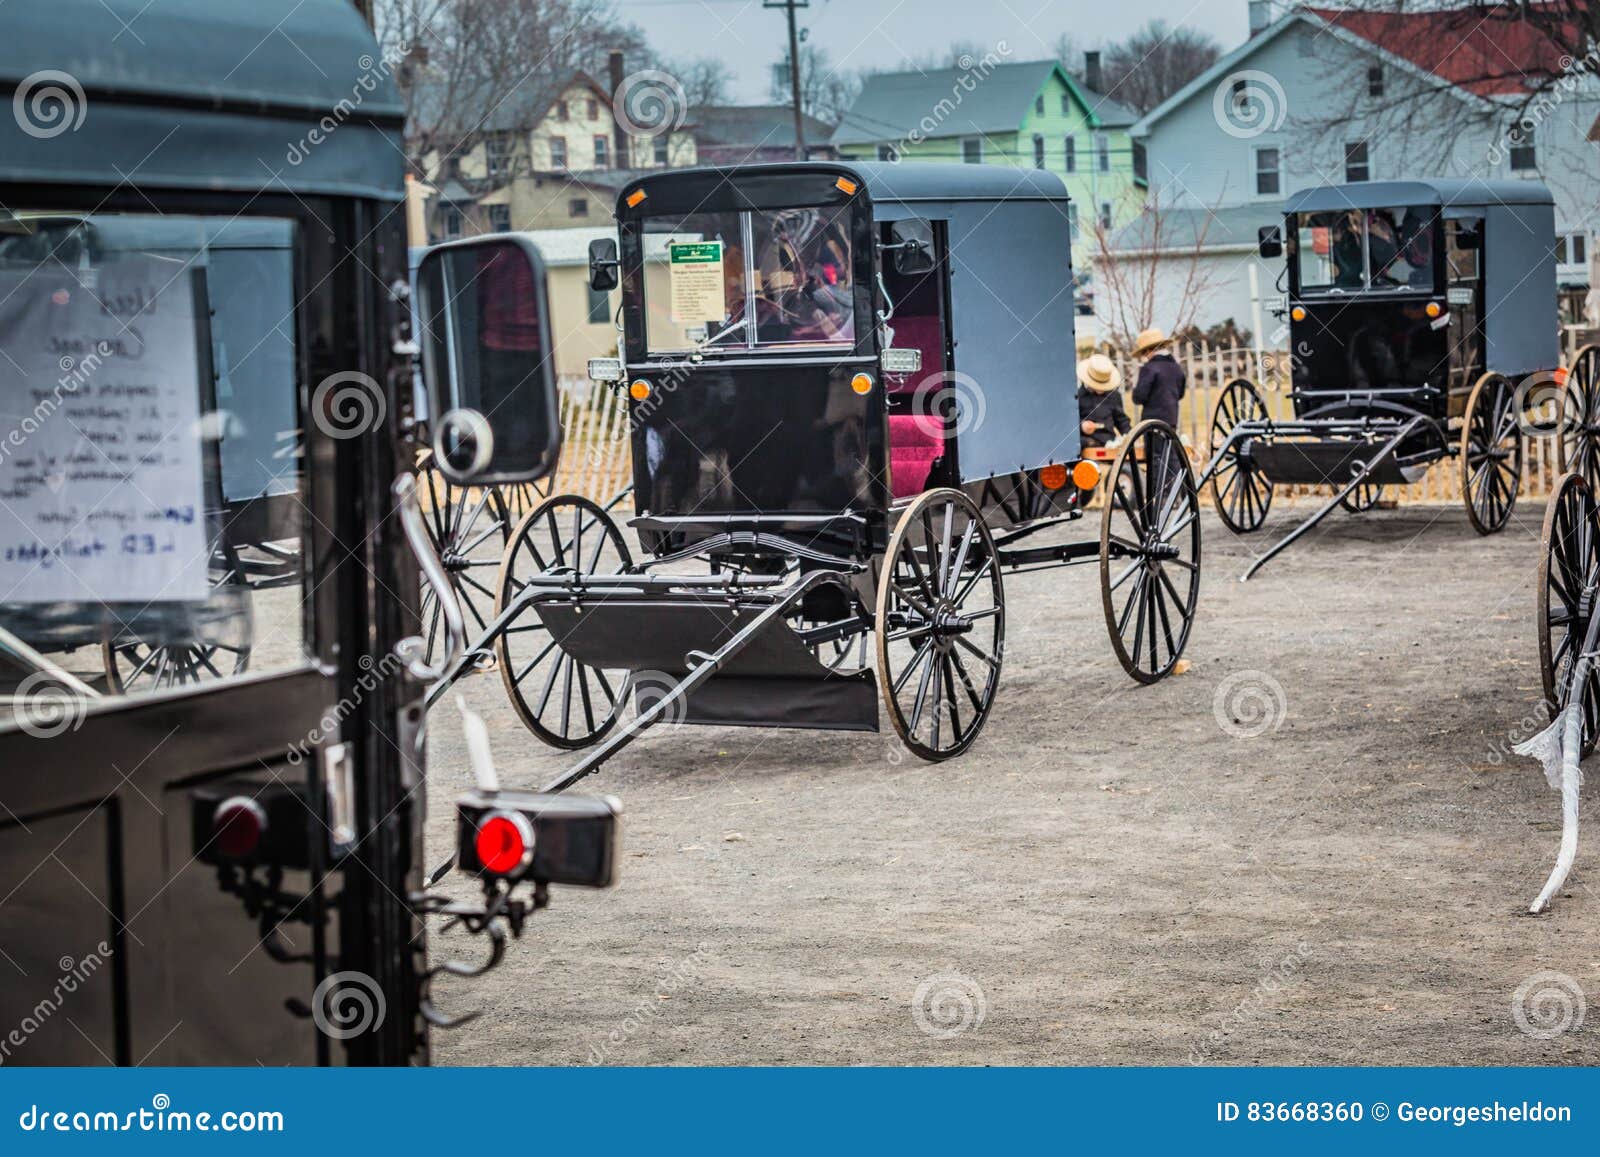 antique amish buggy for sale